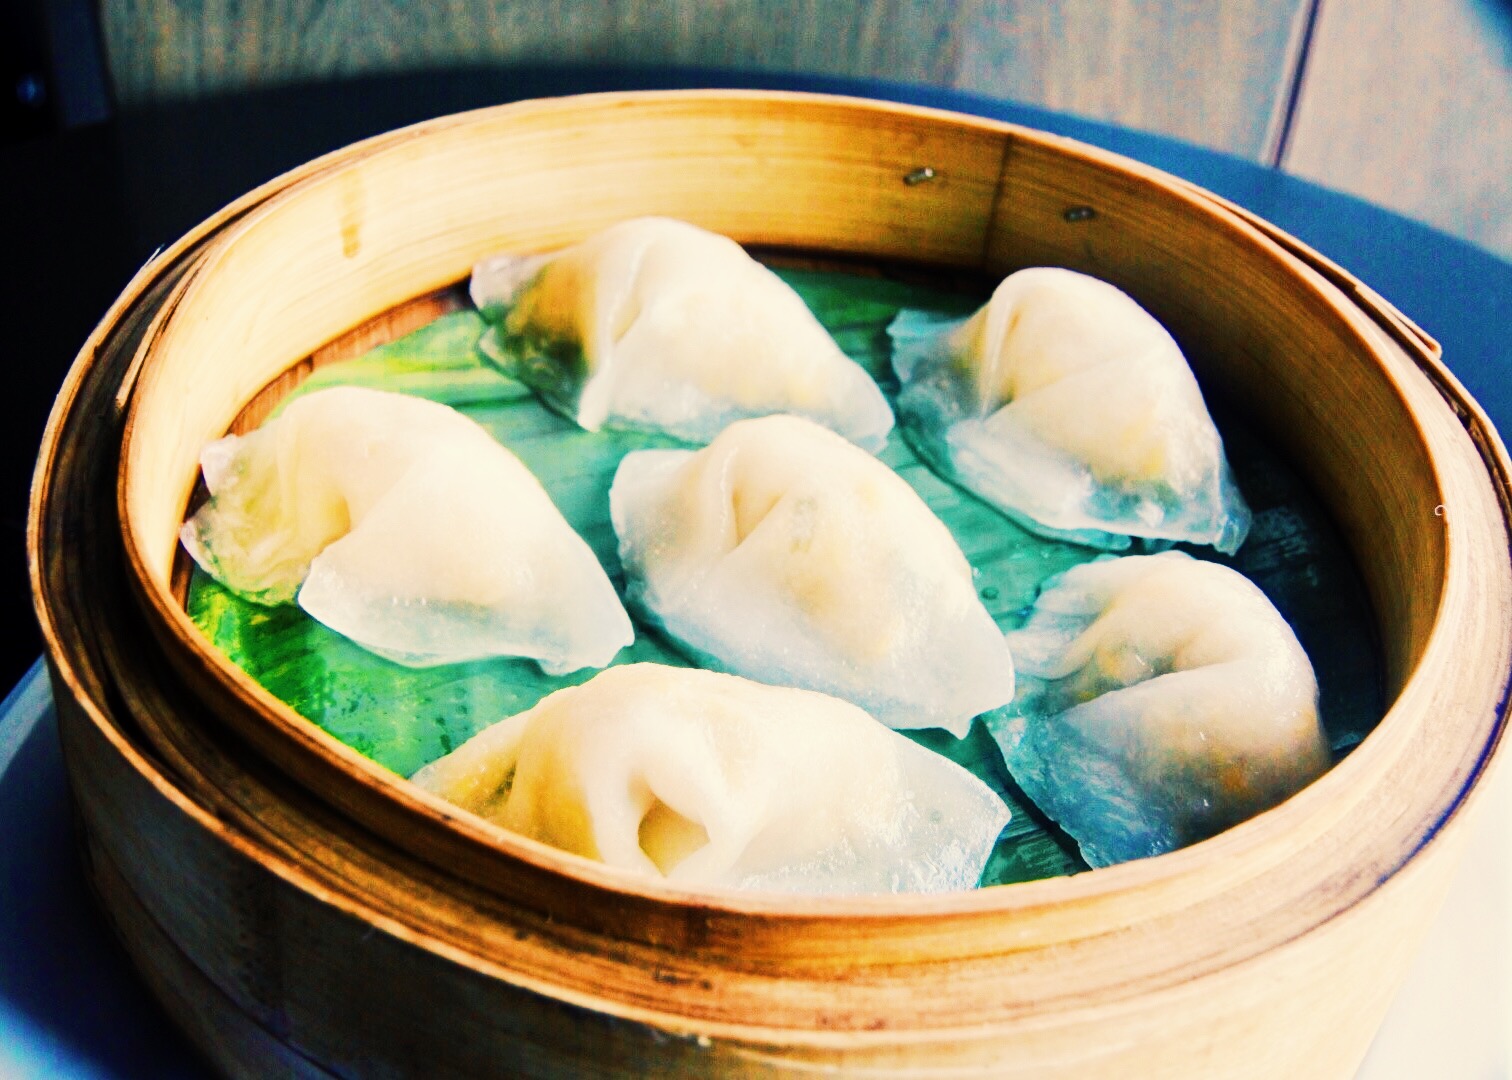 The dimsums